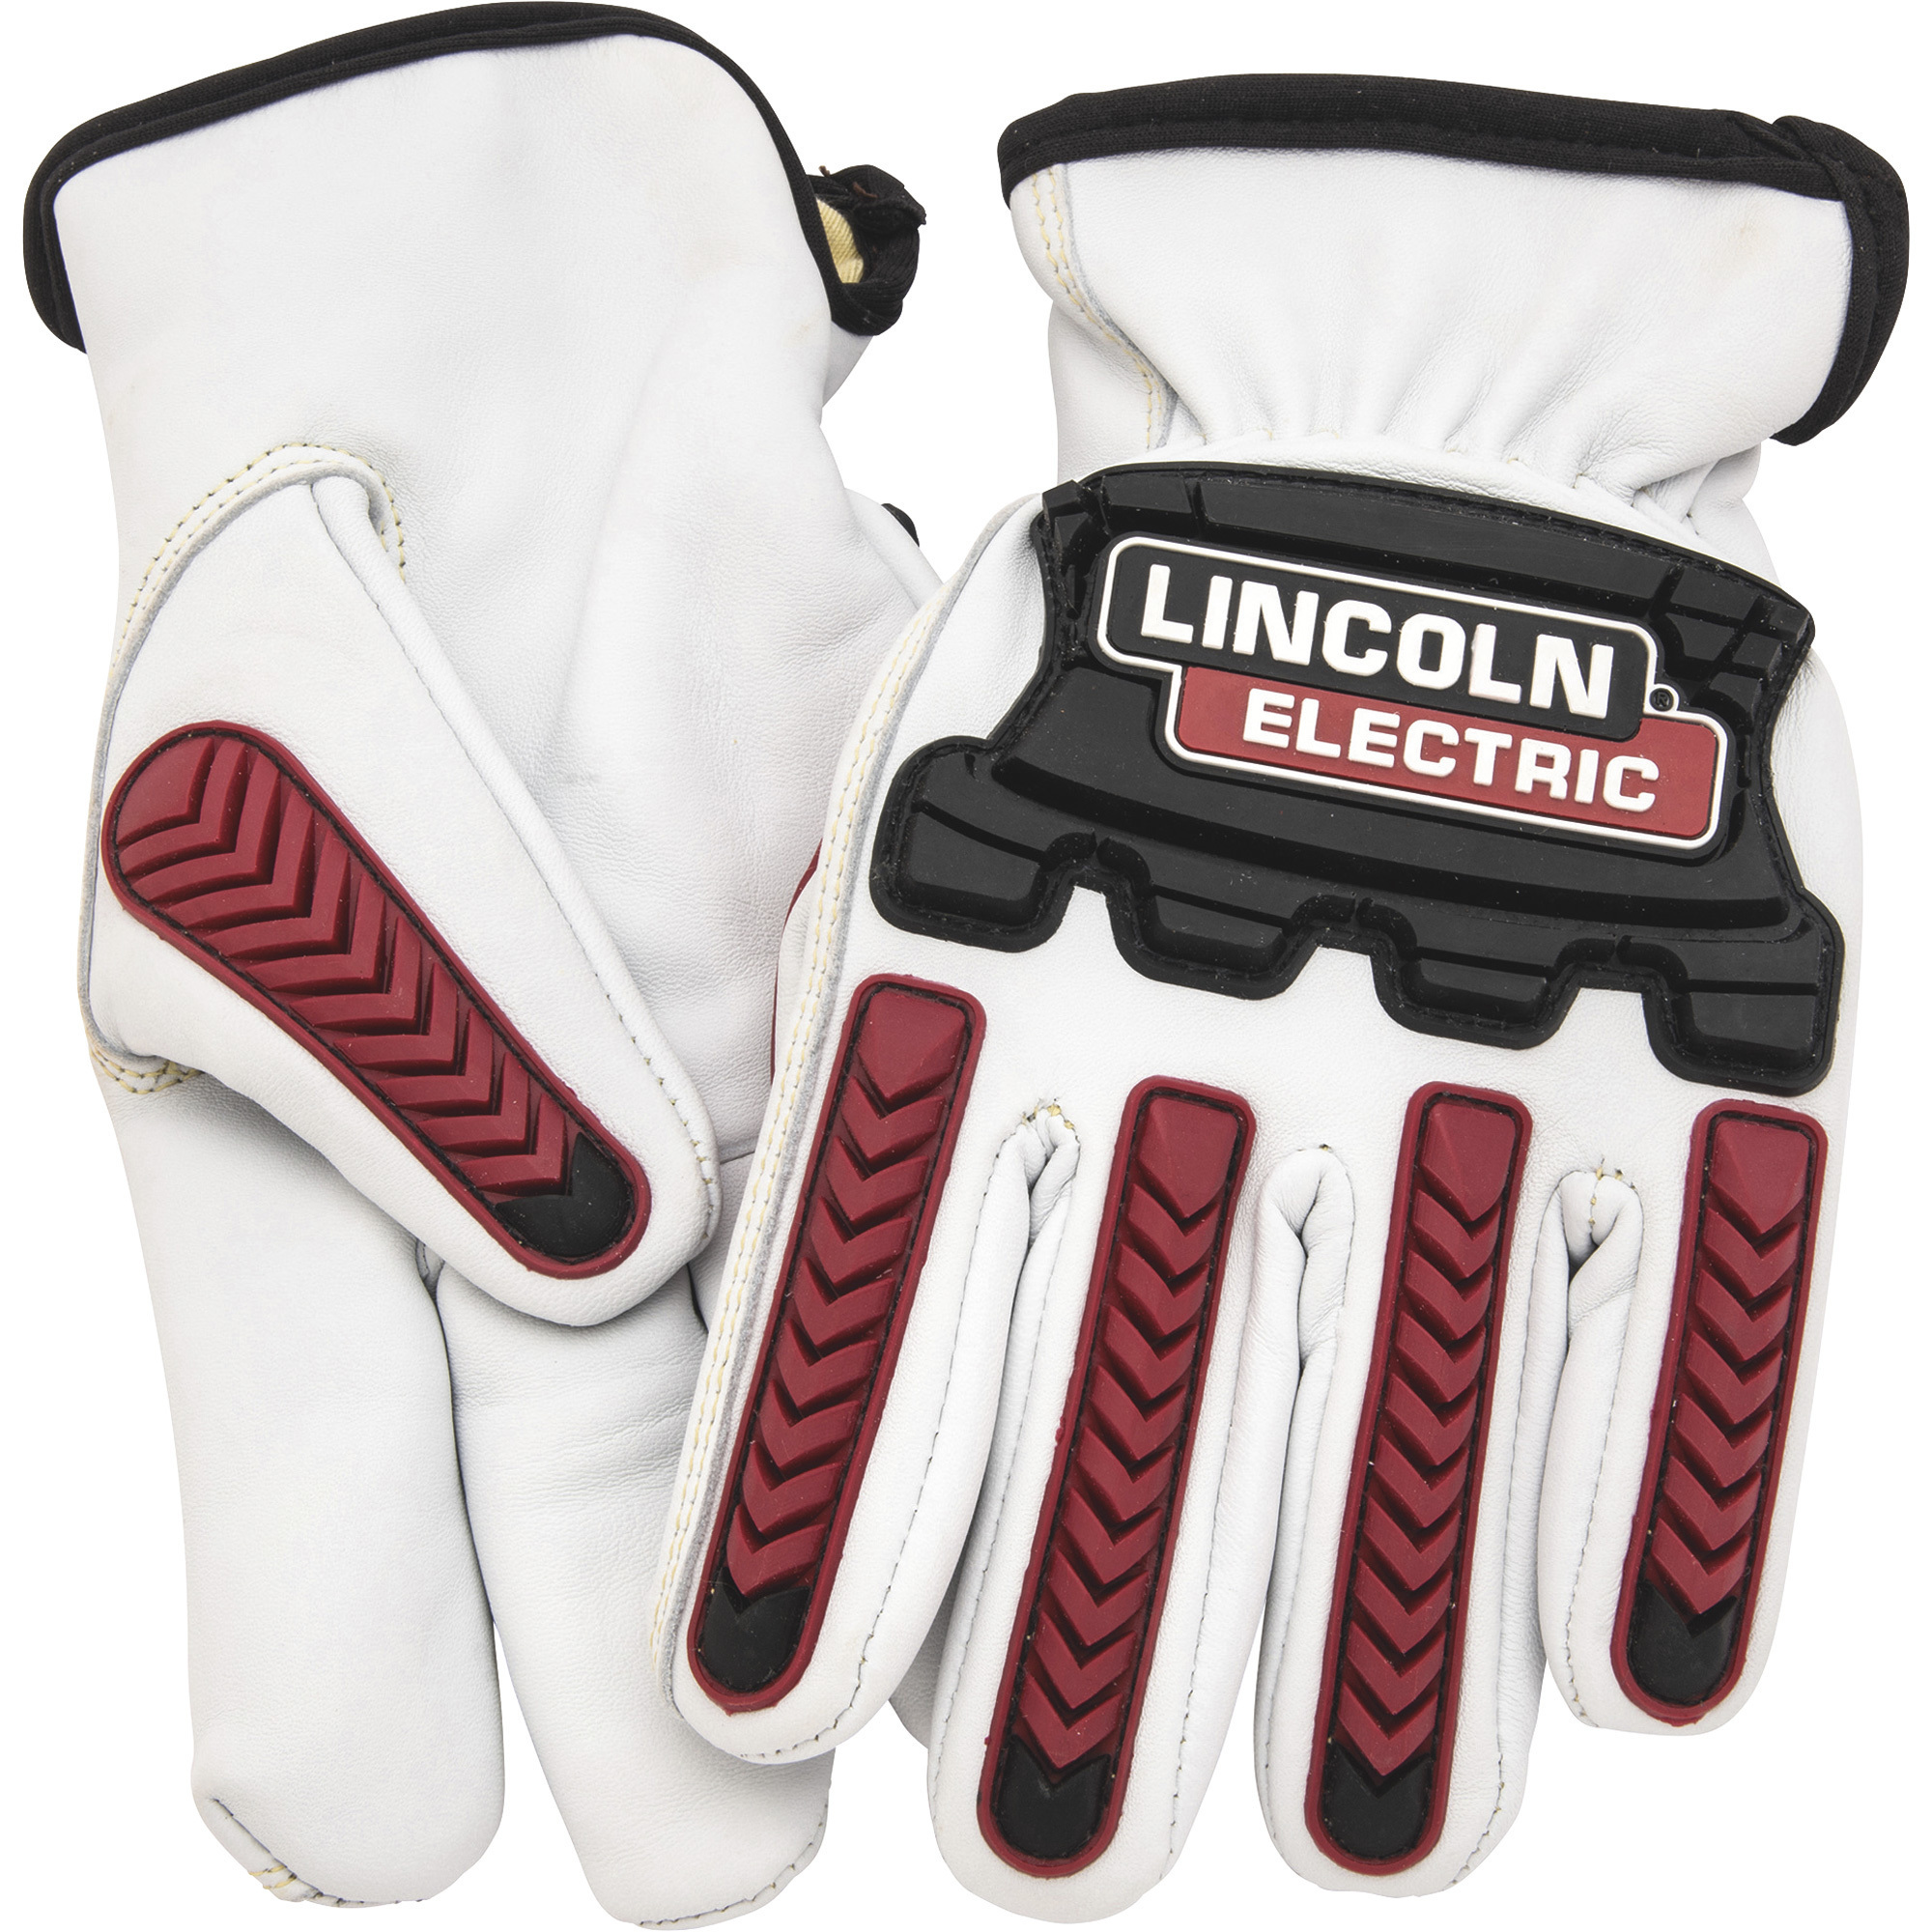 Lincoln Electric Impact- and Cut-Resistant Metalworking Gloves, XL, Model KH850XL